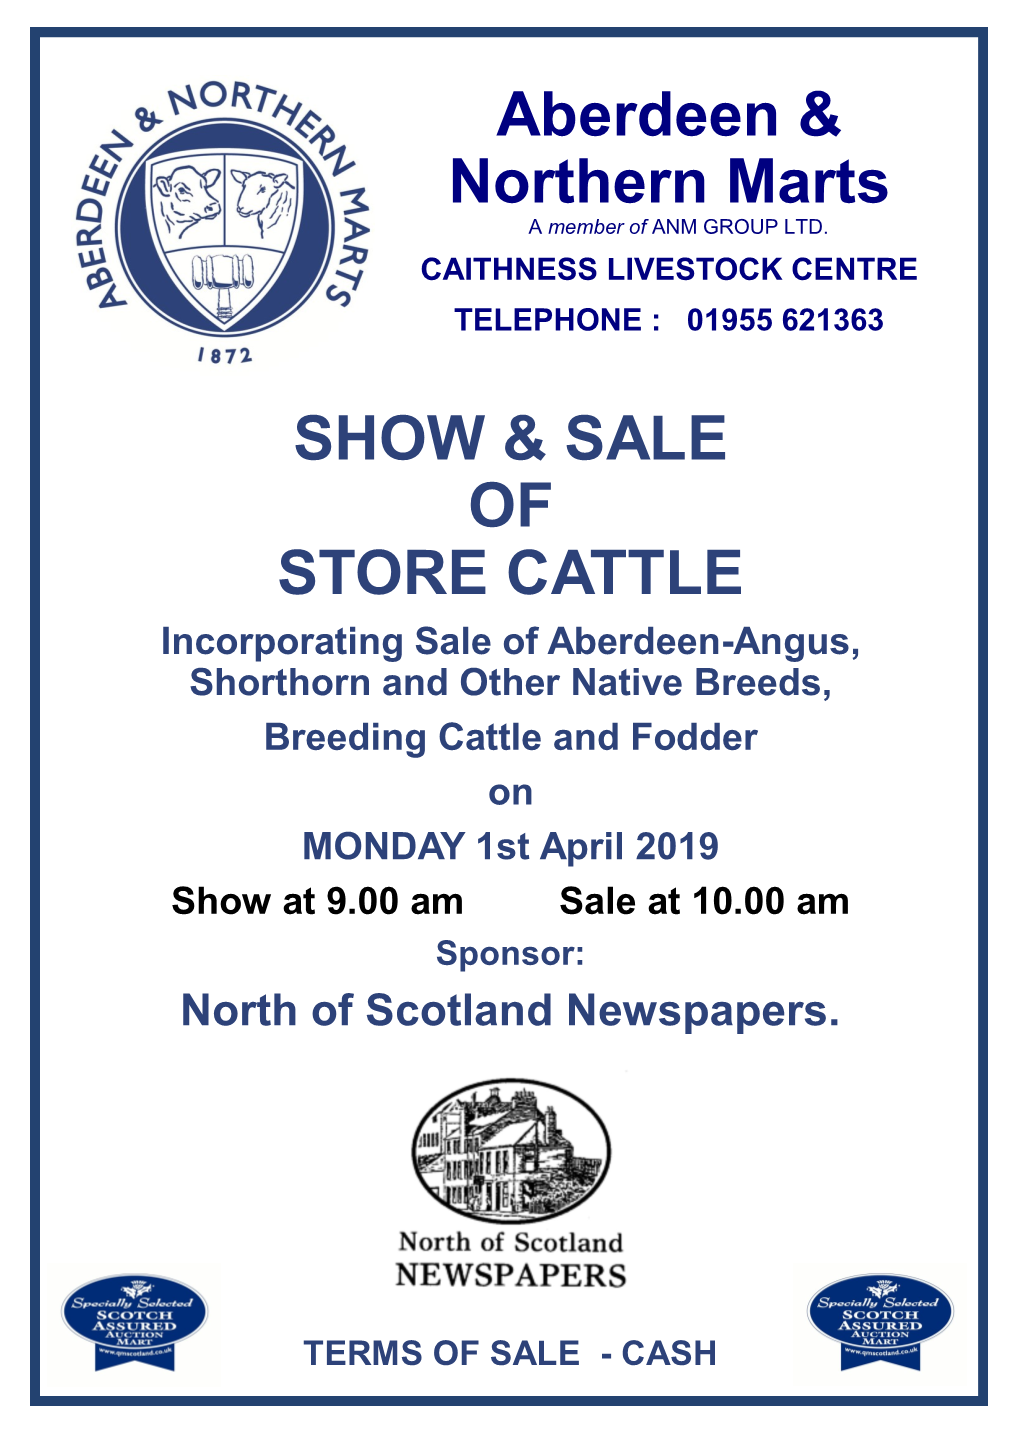 Aberdeen & Northern Marts SHOW & SALE of STORE CATTLE